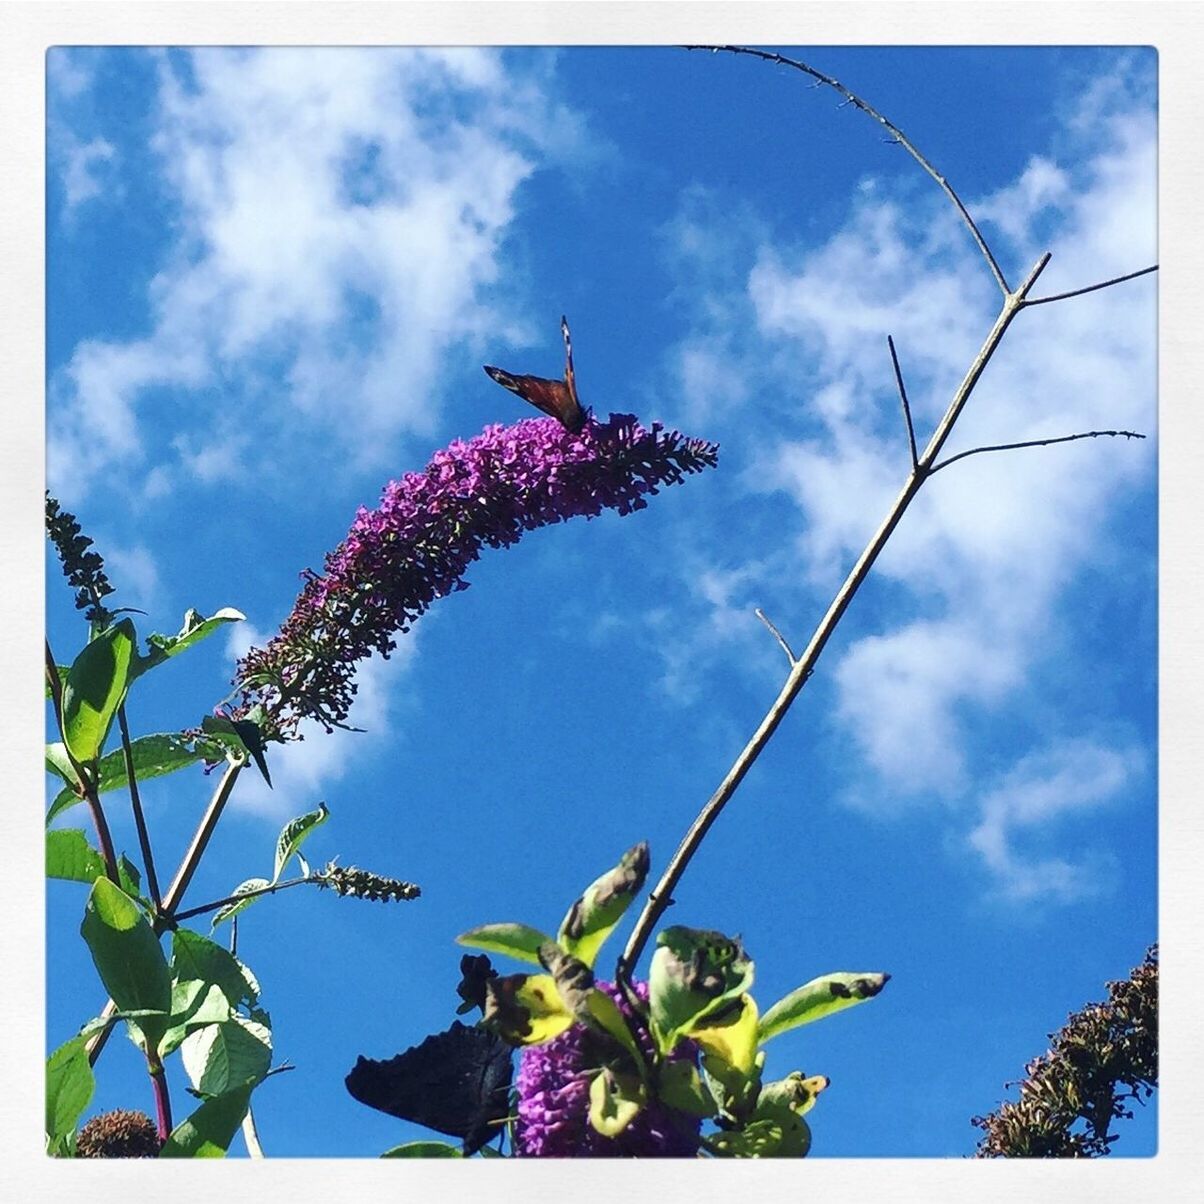 LOW ANGLE VIEW OF FLOWERS AGAINST BLUE SKY